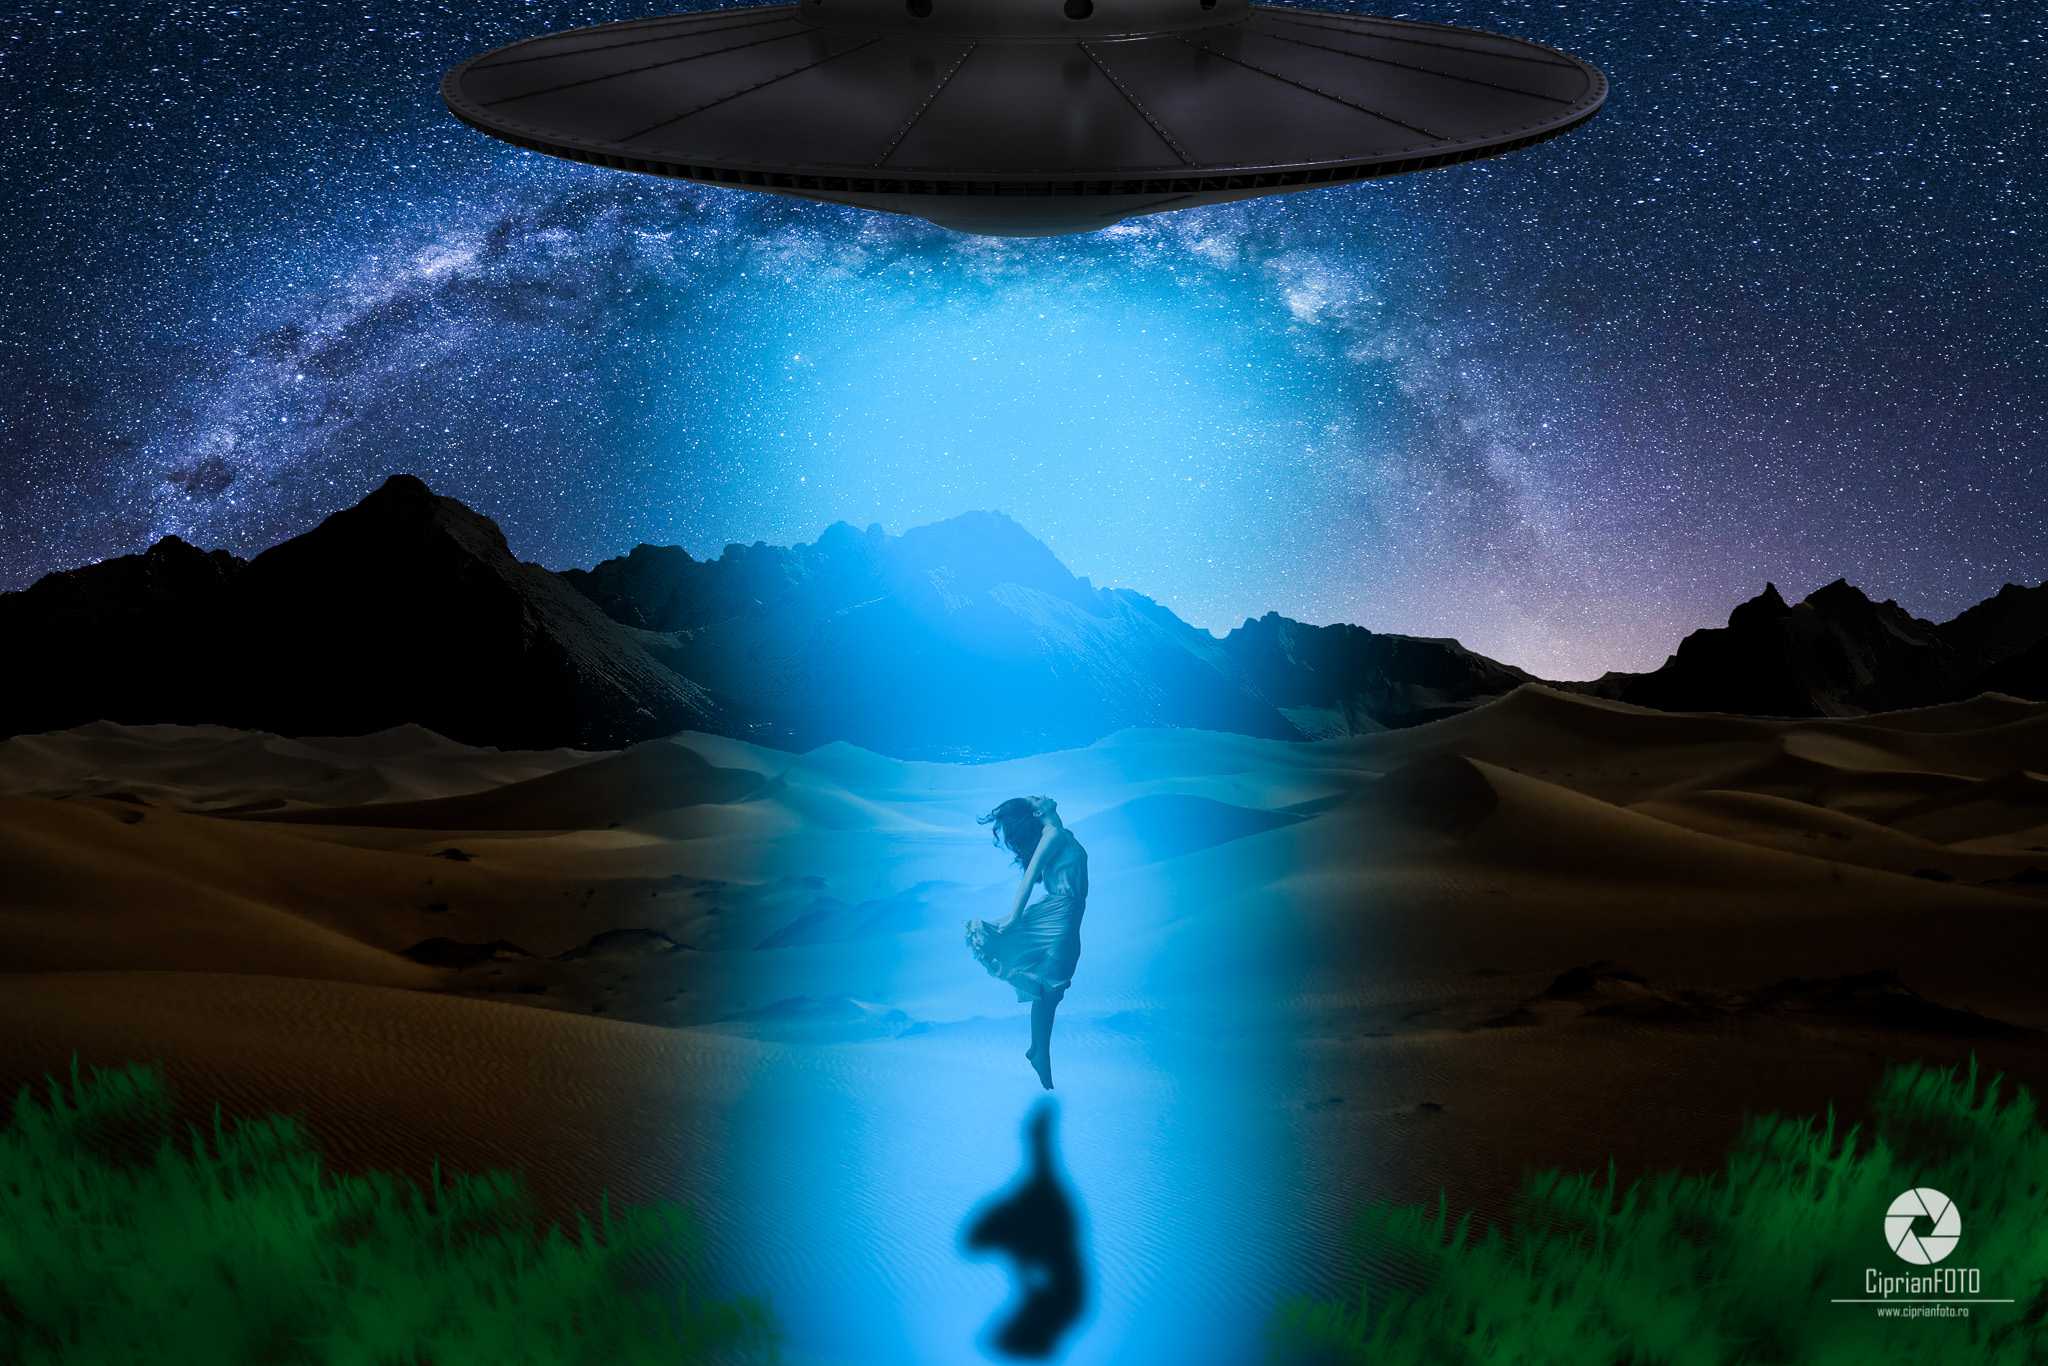 Girl Abducted By UFO, Photoshop Manipulation Tutorial, CiprianFOTO